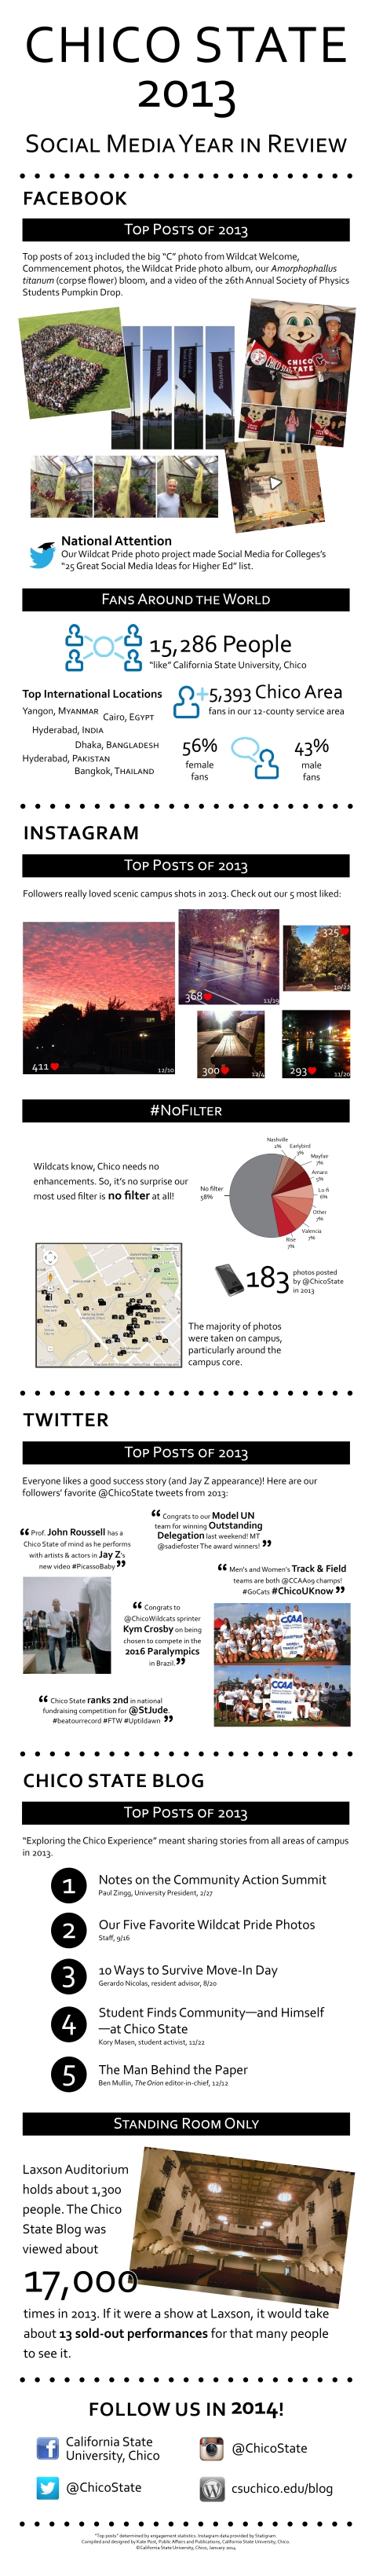 Chico State 2013 Social Media Year in Review